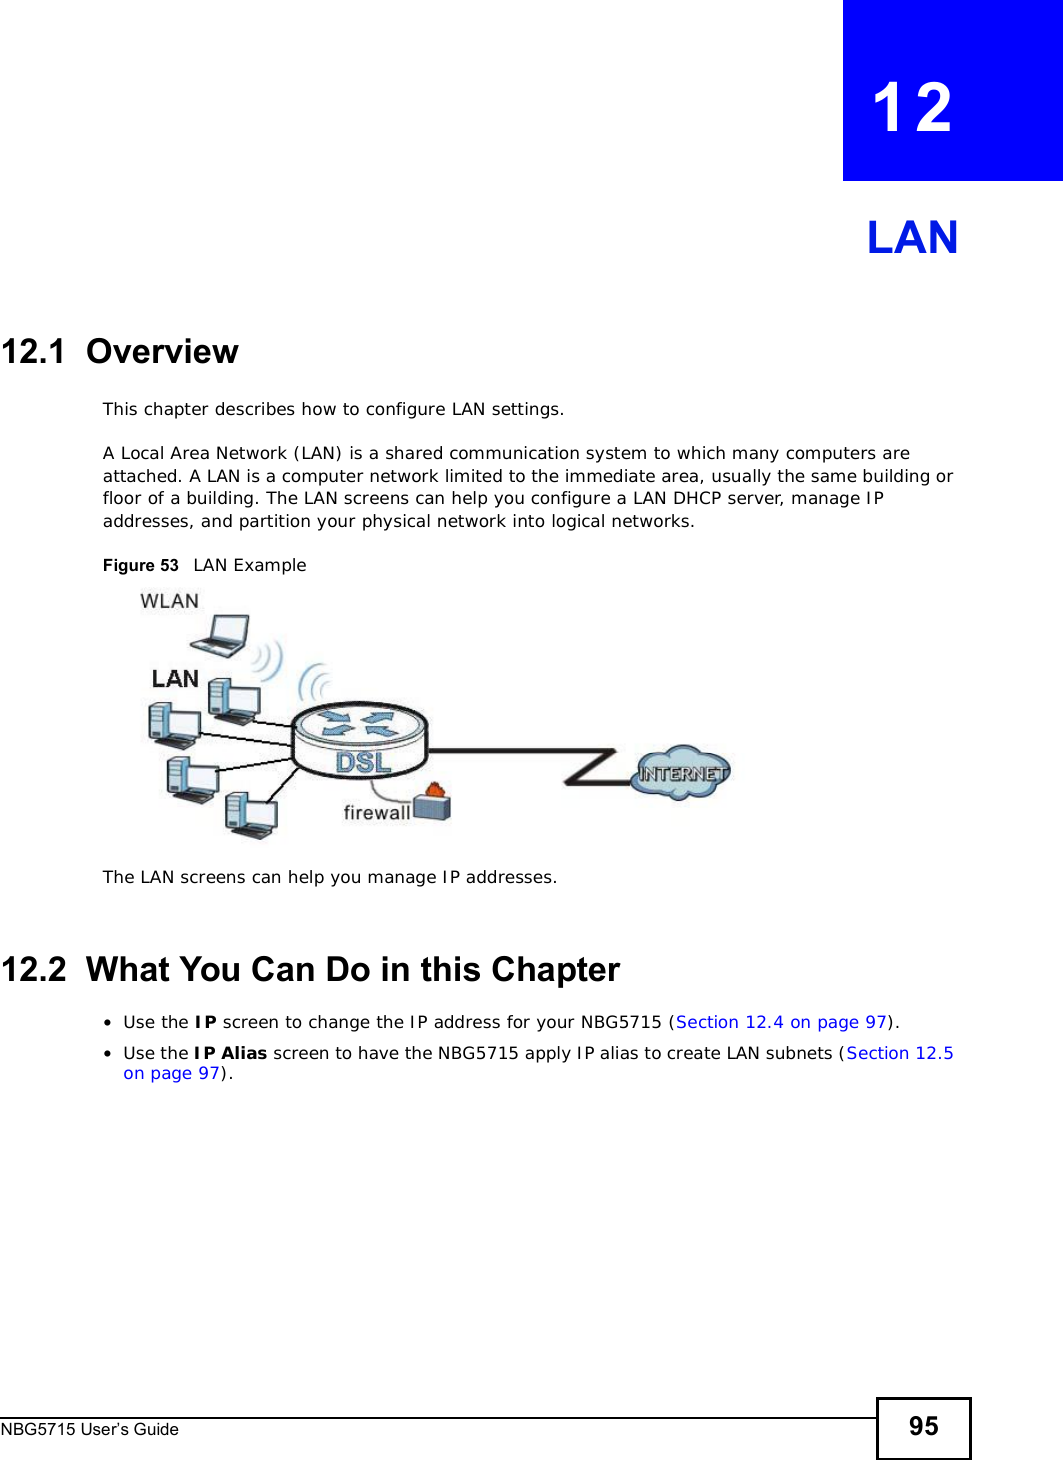 NBG5715 User’s Guide 95CHAPTER   12LAN12.1  OverviewThis chapter describes how to configure LAN settings.A Local Area Network (LAN) is a shared communication system to which many computers are attached. A LAN is a computer network limited to the immediate area, usually the same building or floor of a building. The LAN screens can help you configure a LAN DHCP server, manage IP addresses, and partition your physical network into logical networks.Figure 53   LAN ExampleThe LAN screens can help you manage IP addresses.12.2  What You Can Do in this Chapter•Use the IP screen to change the IP address for your NBG5715 (Section 12.4 on page 97).•Use the IP Alias screen to have the NBG5715 apply IP alias to create LAN subnets (Section 12.5 on page 97).